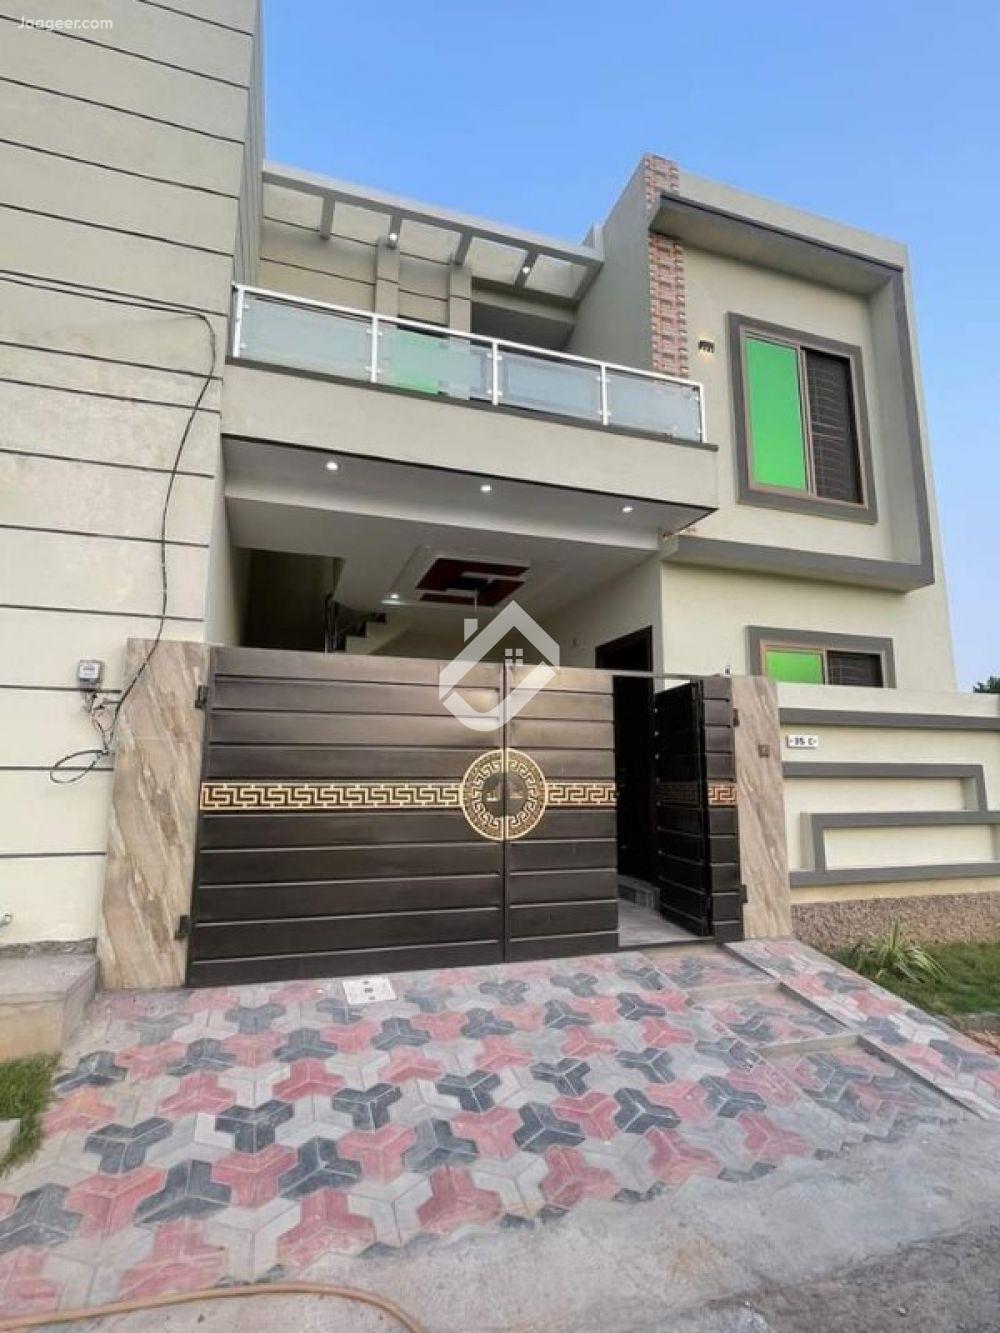 View  4.5 Marla Double Storey House For Sale In Waris Town Phase 2 in Waris Town, Sargodha